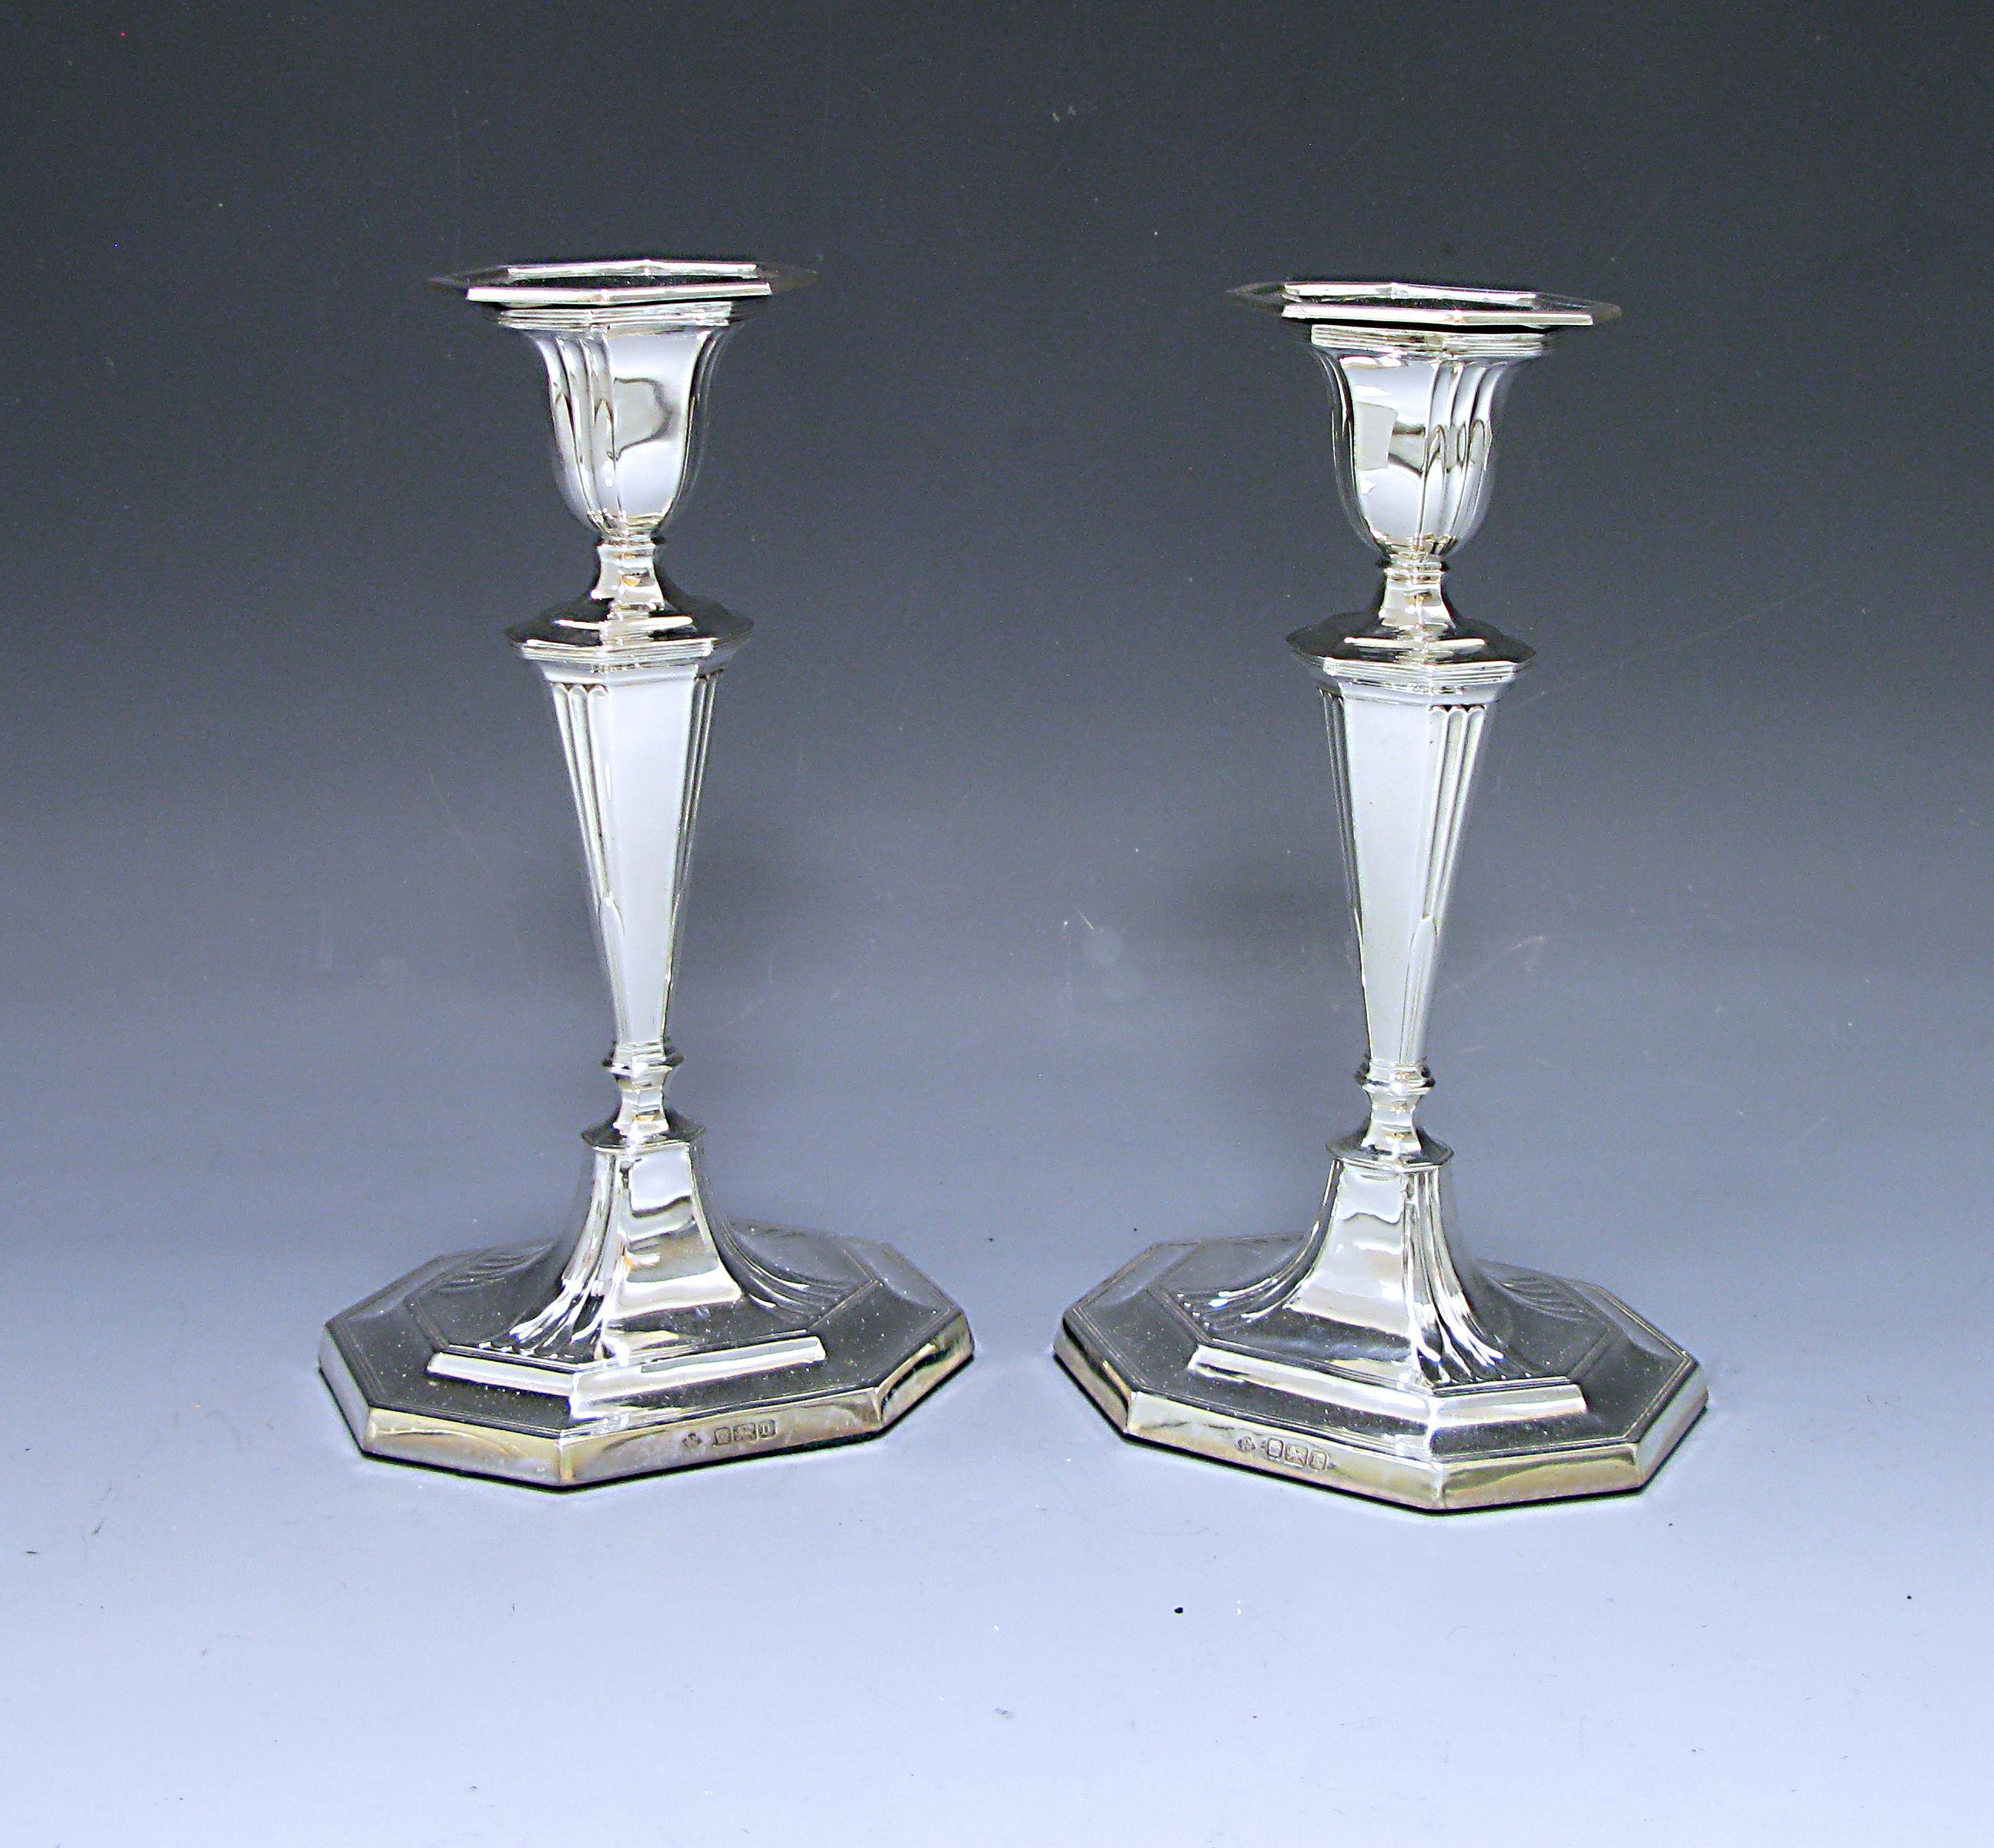 A delightful pair of Edwardian antique silver candlestick, they have V shaped stems with fluted sides. The candlesticks stand on eight sided shaped bases with reeded borders and the reeding is repeated on the removable nozzles.

Measures: Height